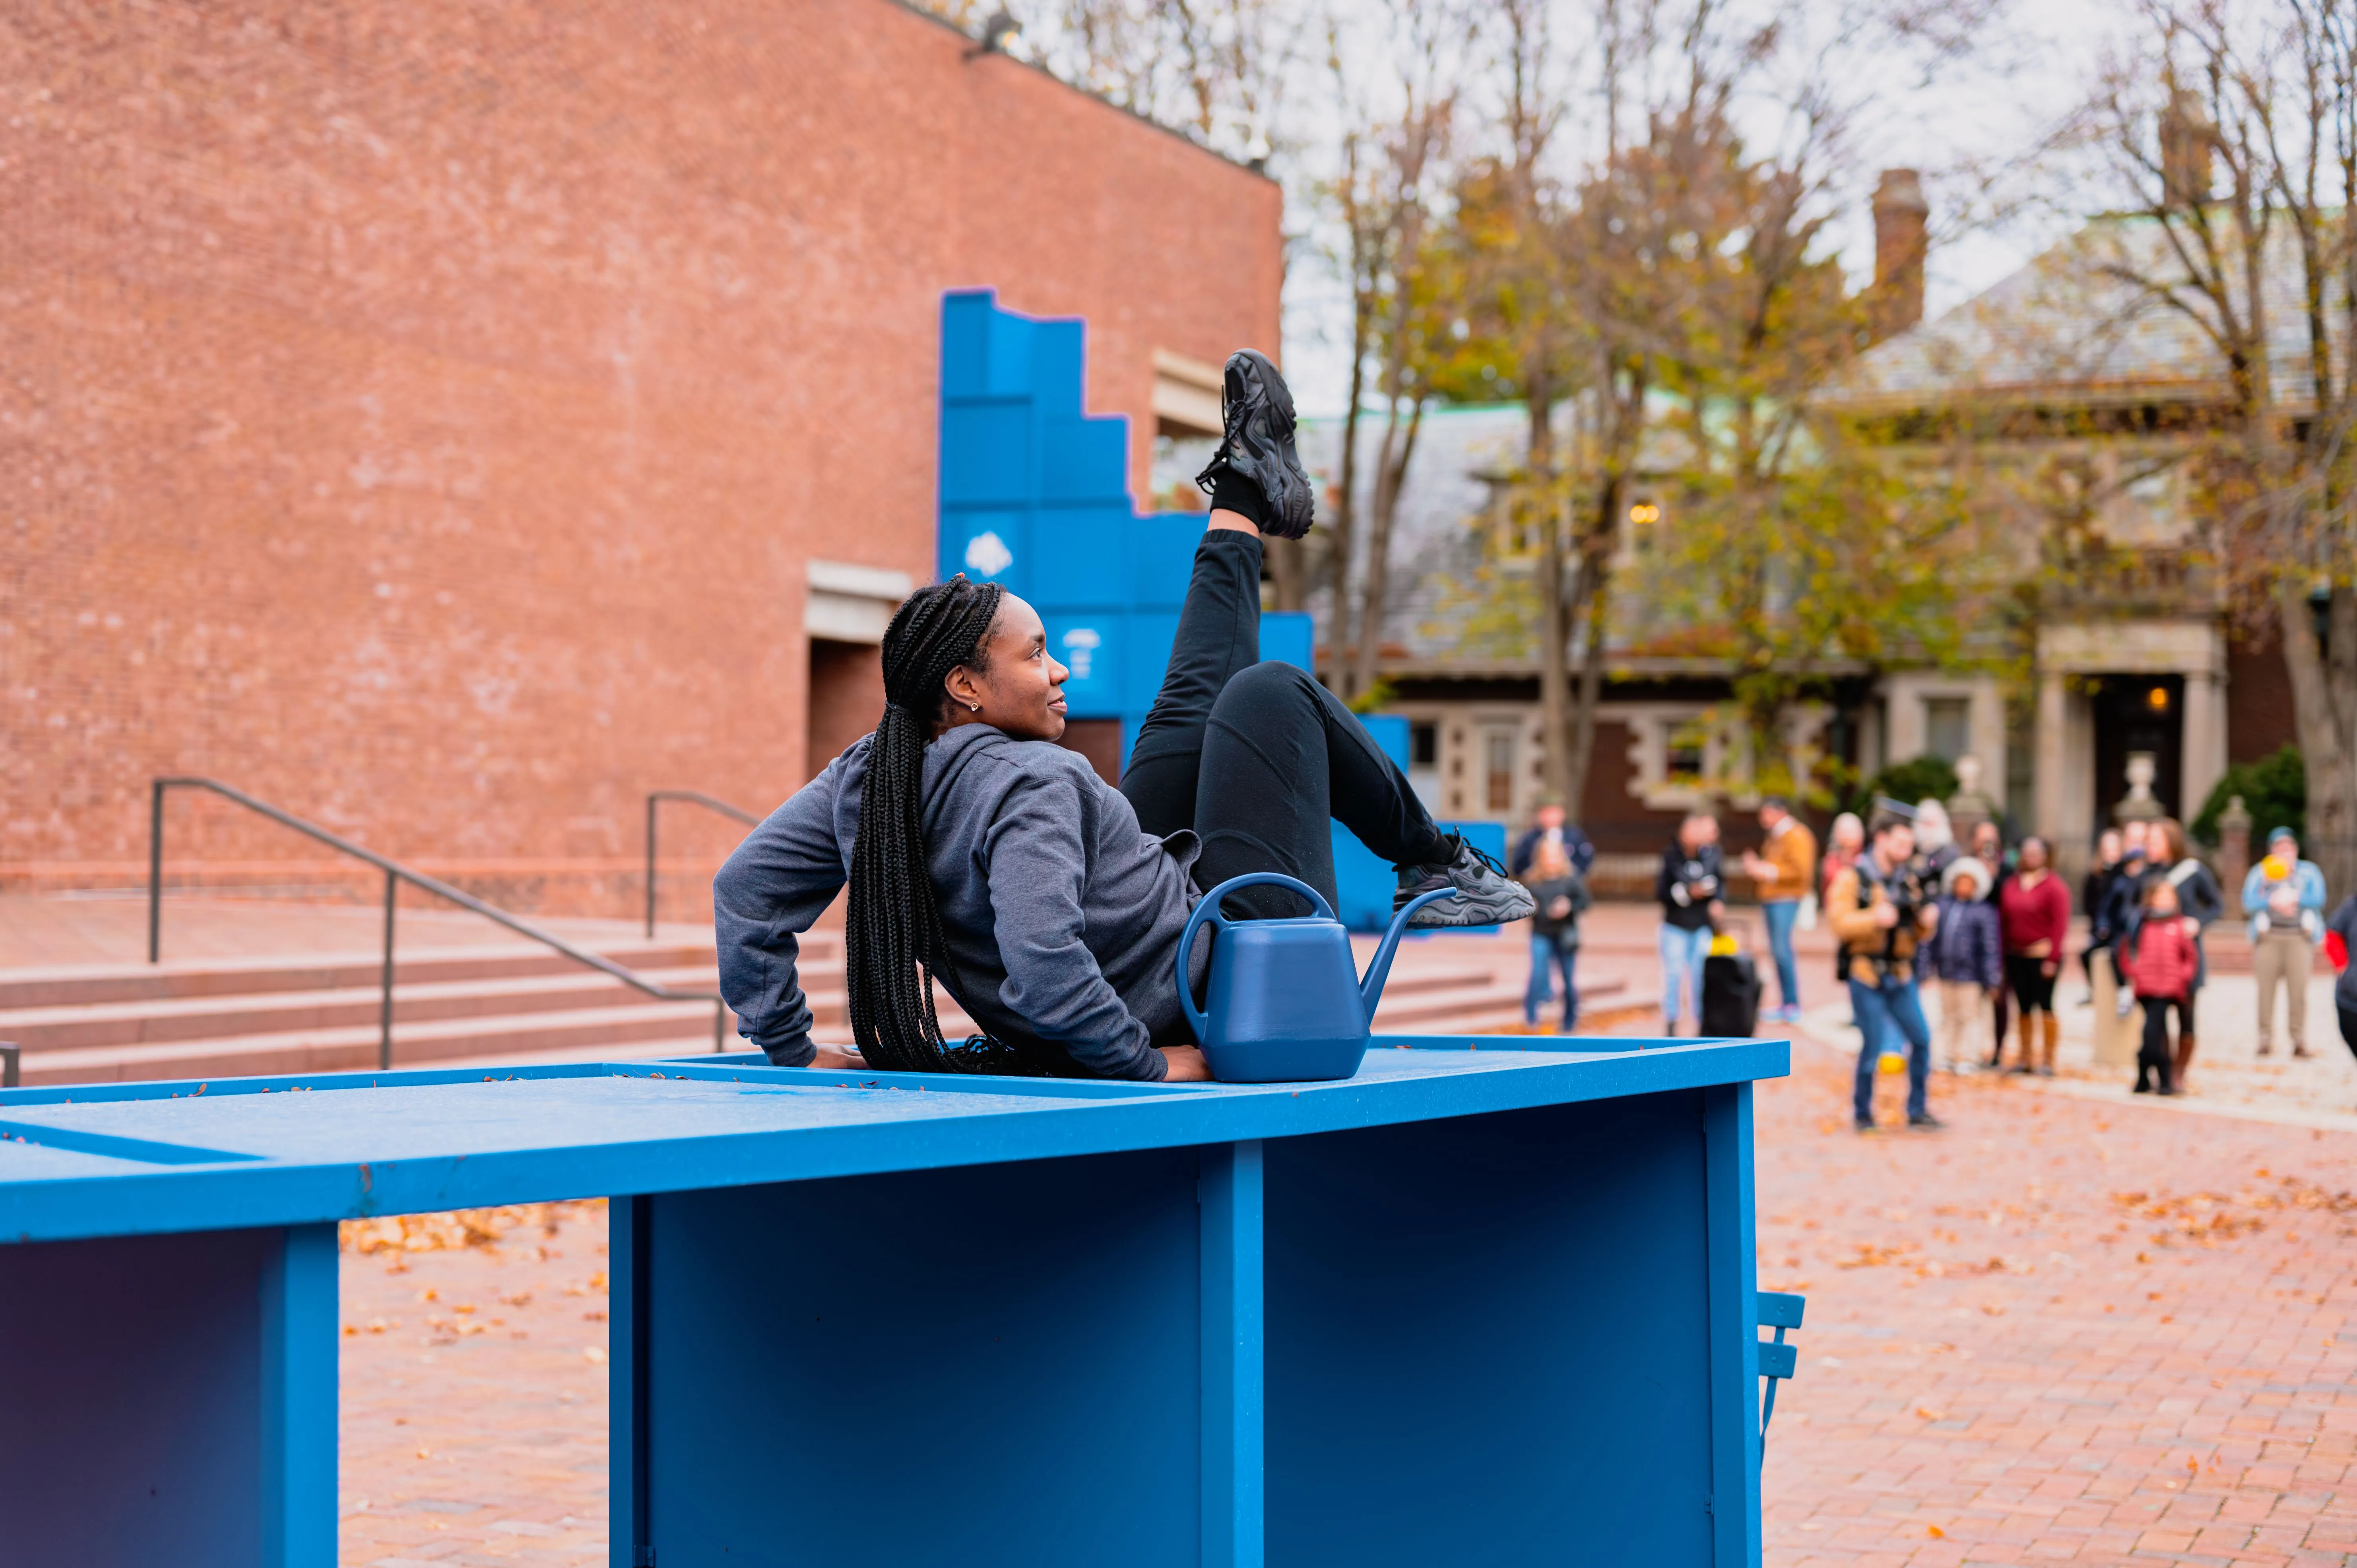 People sitting and chatting on a blue outdoor structure with other individuals walking by in the background.